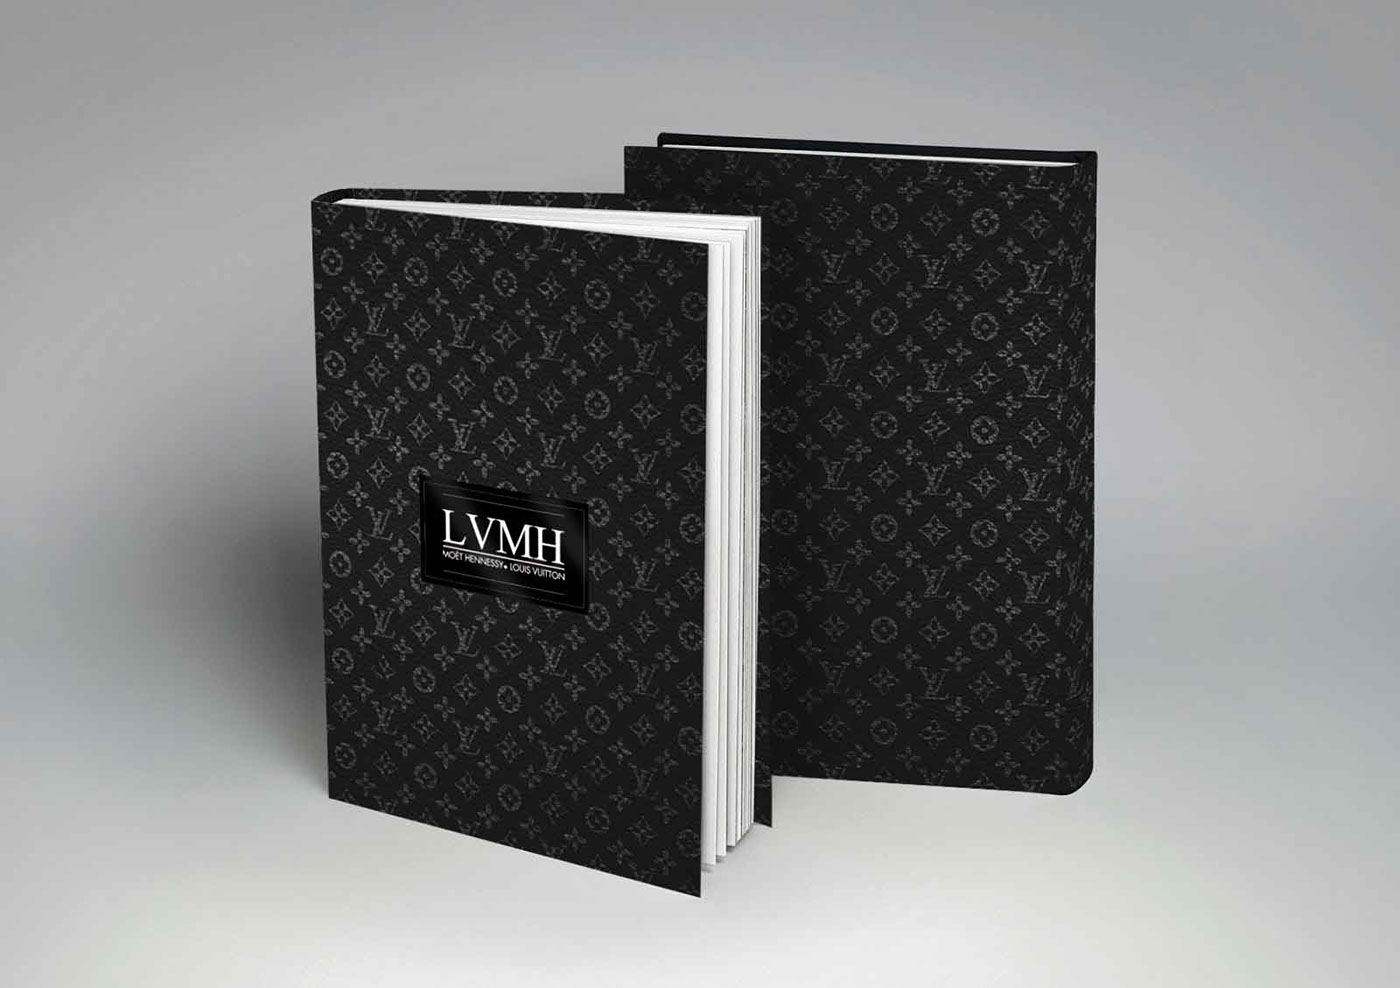 LVMH Moët Hennessy • Louis Vuitton Annual Report on Behance